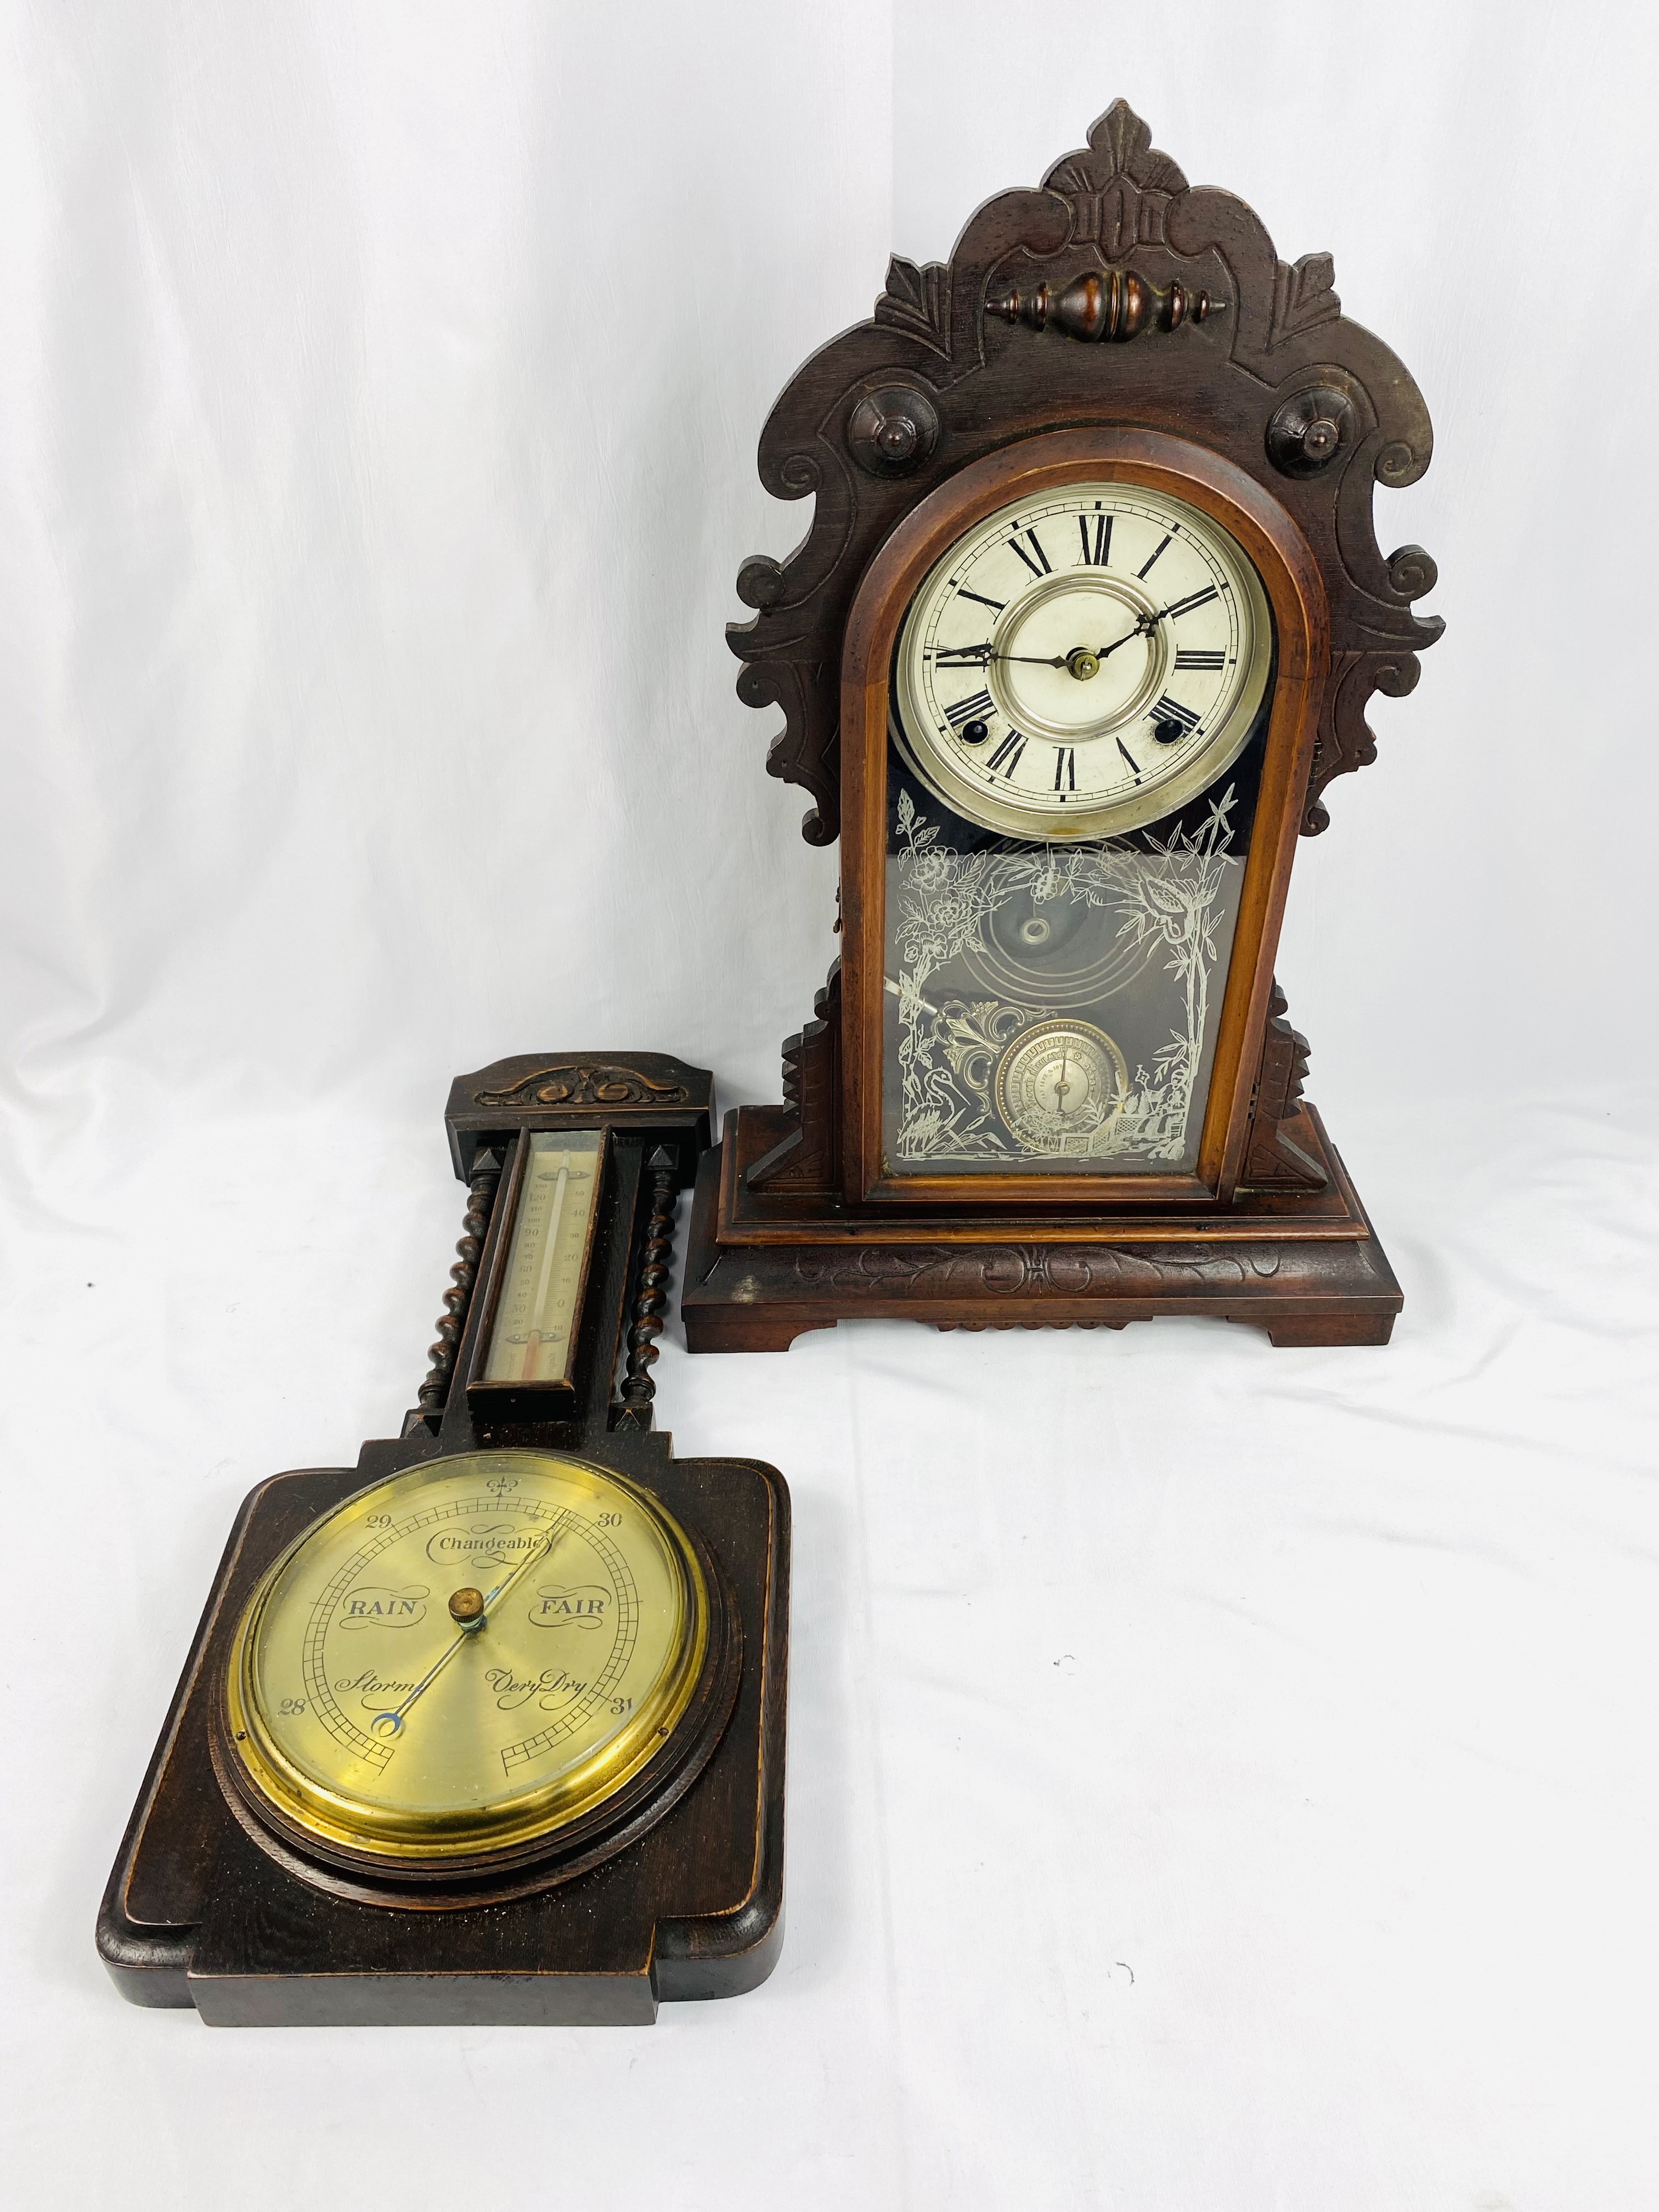 Wood cased mantel clock together with a wall mounted barometer